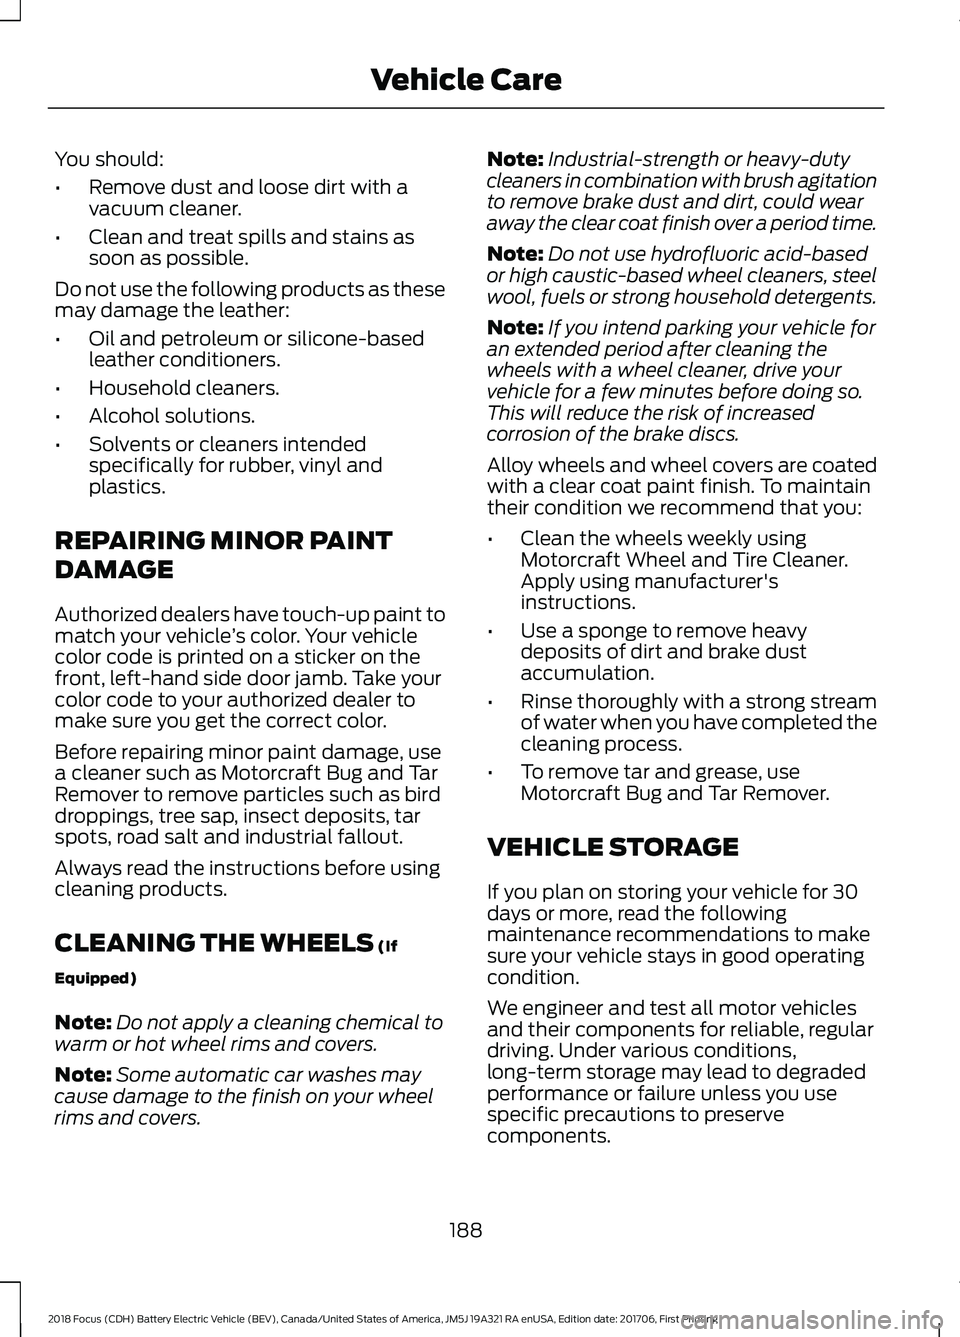 FORD FOCUS ELECTRIC 2018  Owners Manual You should:
•
Remove dust and loose dirt with a
vacuum cleaner.
• Clean and treat spills and stains as
soon as possible.
Do not use the following products as these
may damage the leather:
• Oil 